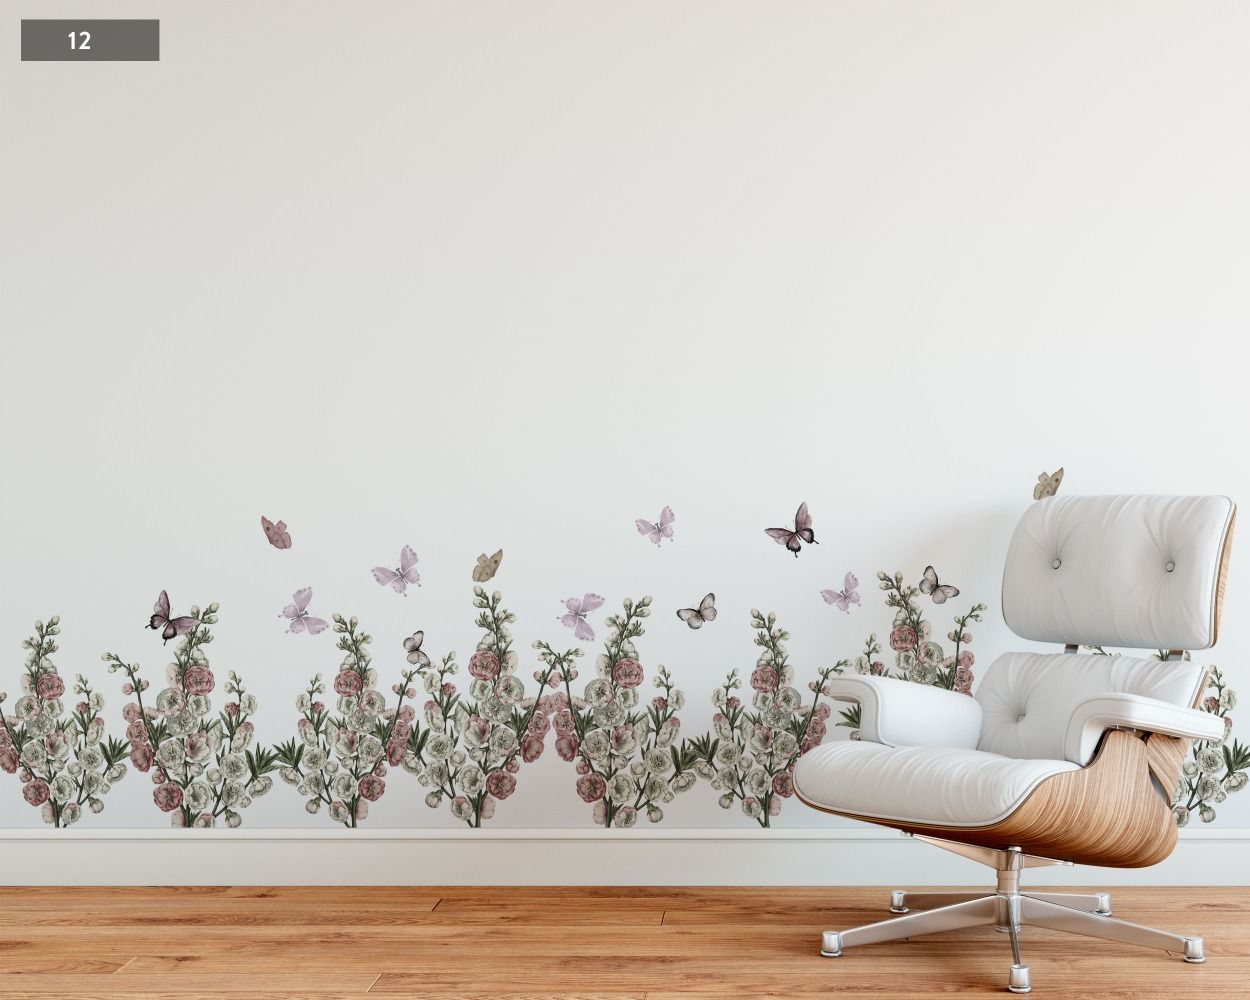 Best Beautiful Winter Floral Watercolour Flowers Headboard Wall Decals for bedroom wall decor